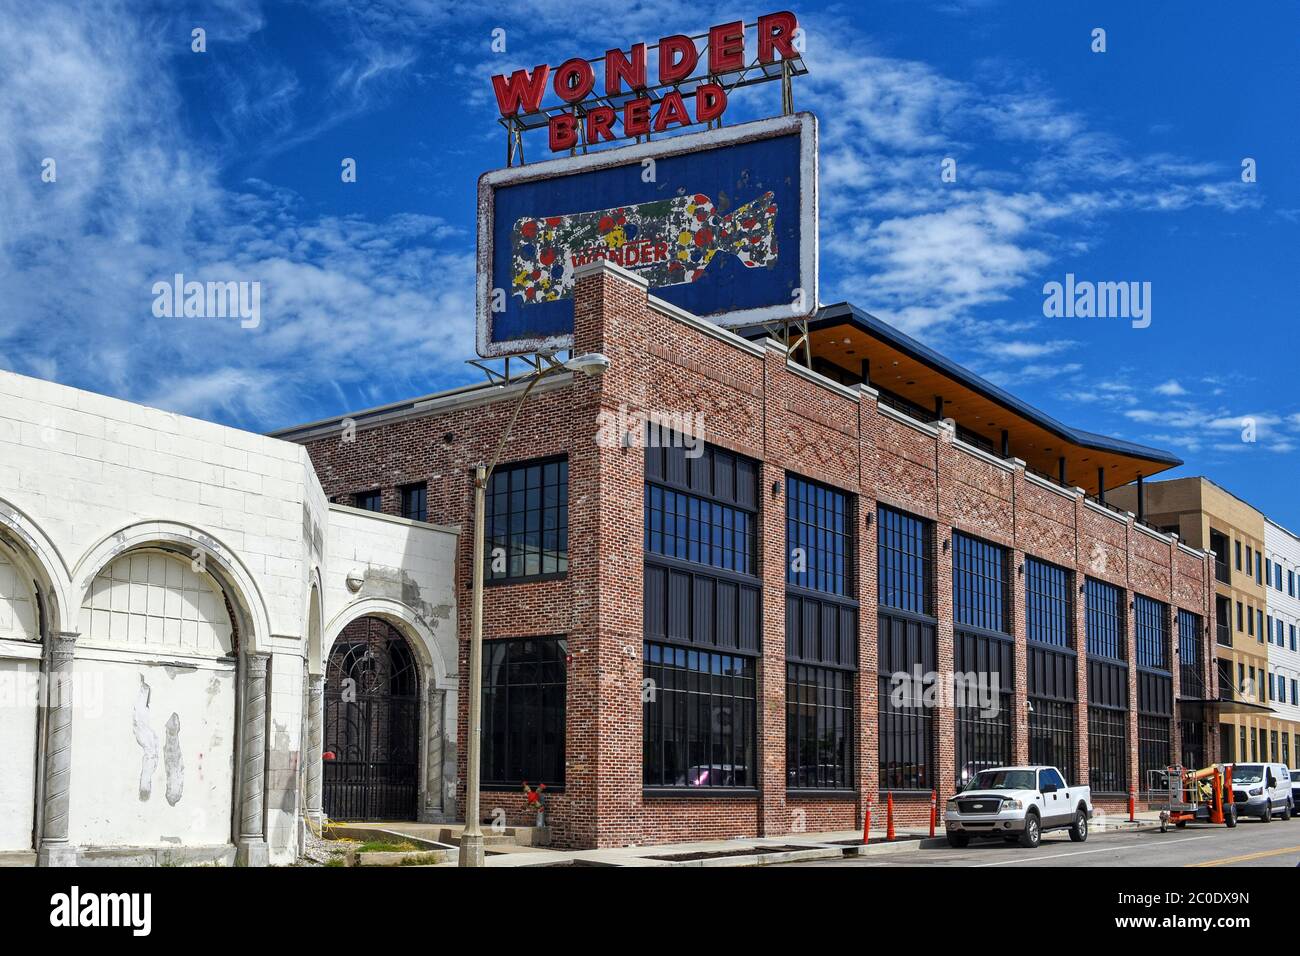 Memphis, TN, USA - September 24, 2019: The Wonder Bread factory building on Monroe Avenue in the Edge District was built in 1921 but was left vacant i Stock Photo